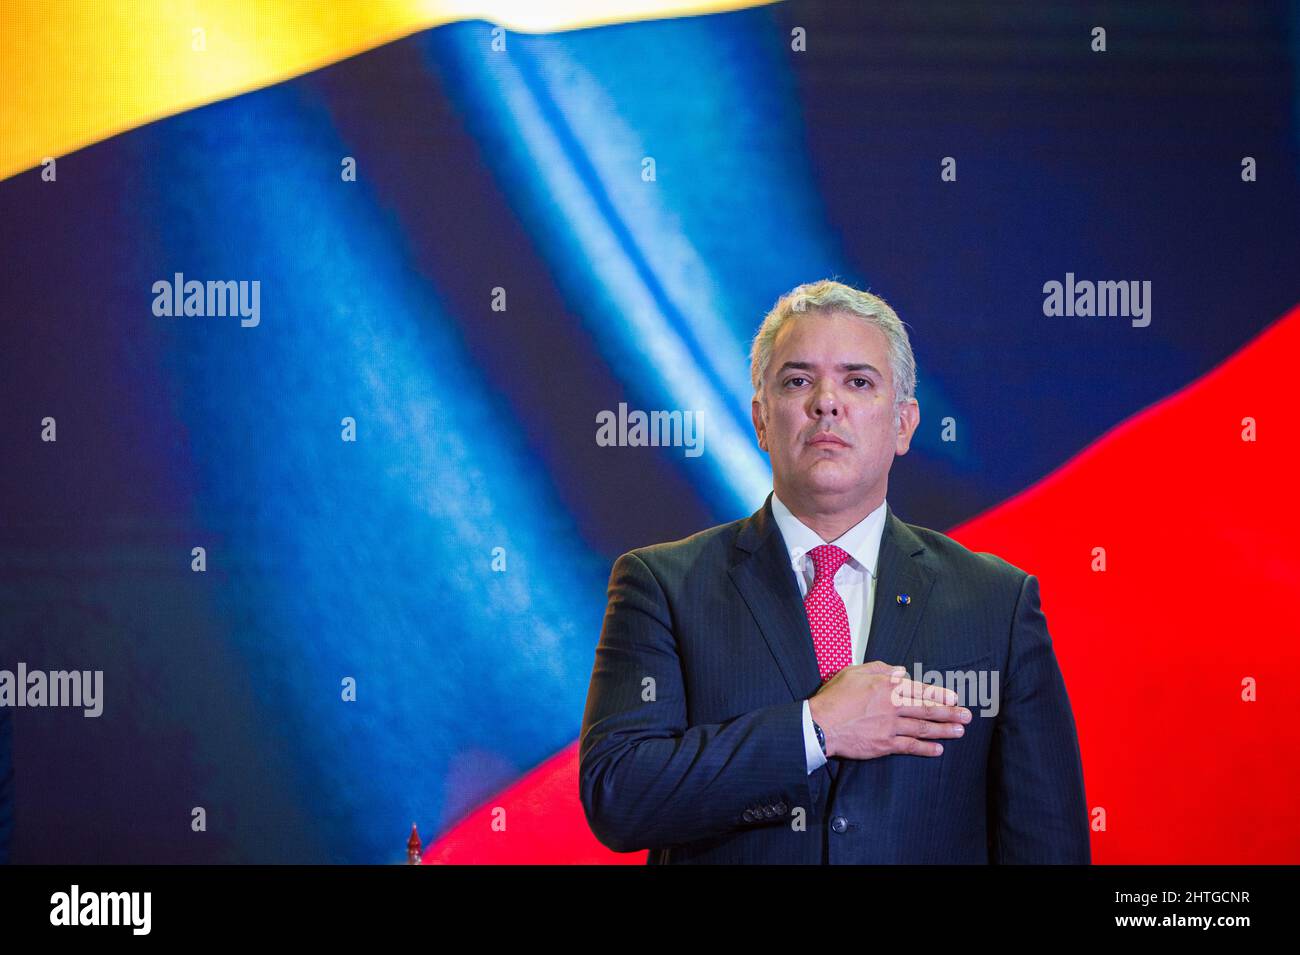 Colombia's president Ivan Duque Marquez sings the national anthem during the inauguration ceremony of the Week of Citizen Security 'Semana de Seguridad Ciudadana' 2022, in Bogota, Colombia where 26 countries take part from February 28 to March 3. On February 28, 2022. Stock Photo